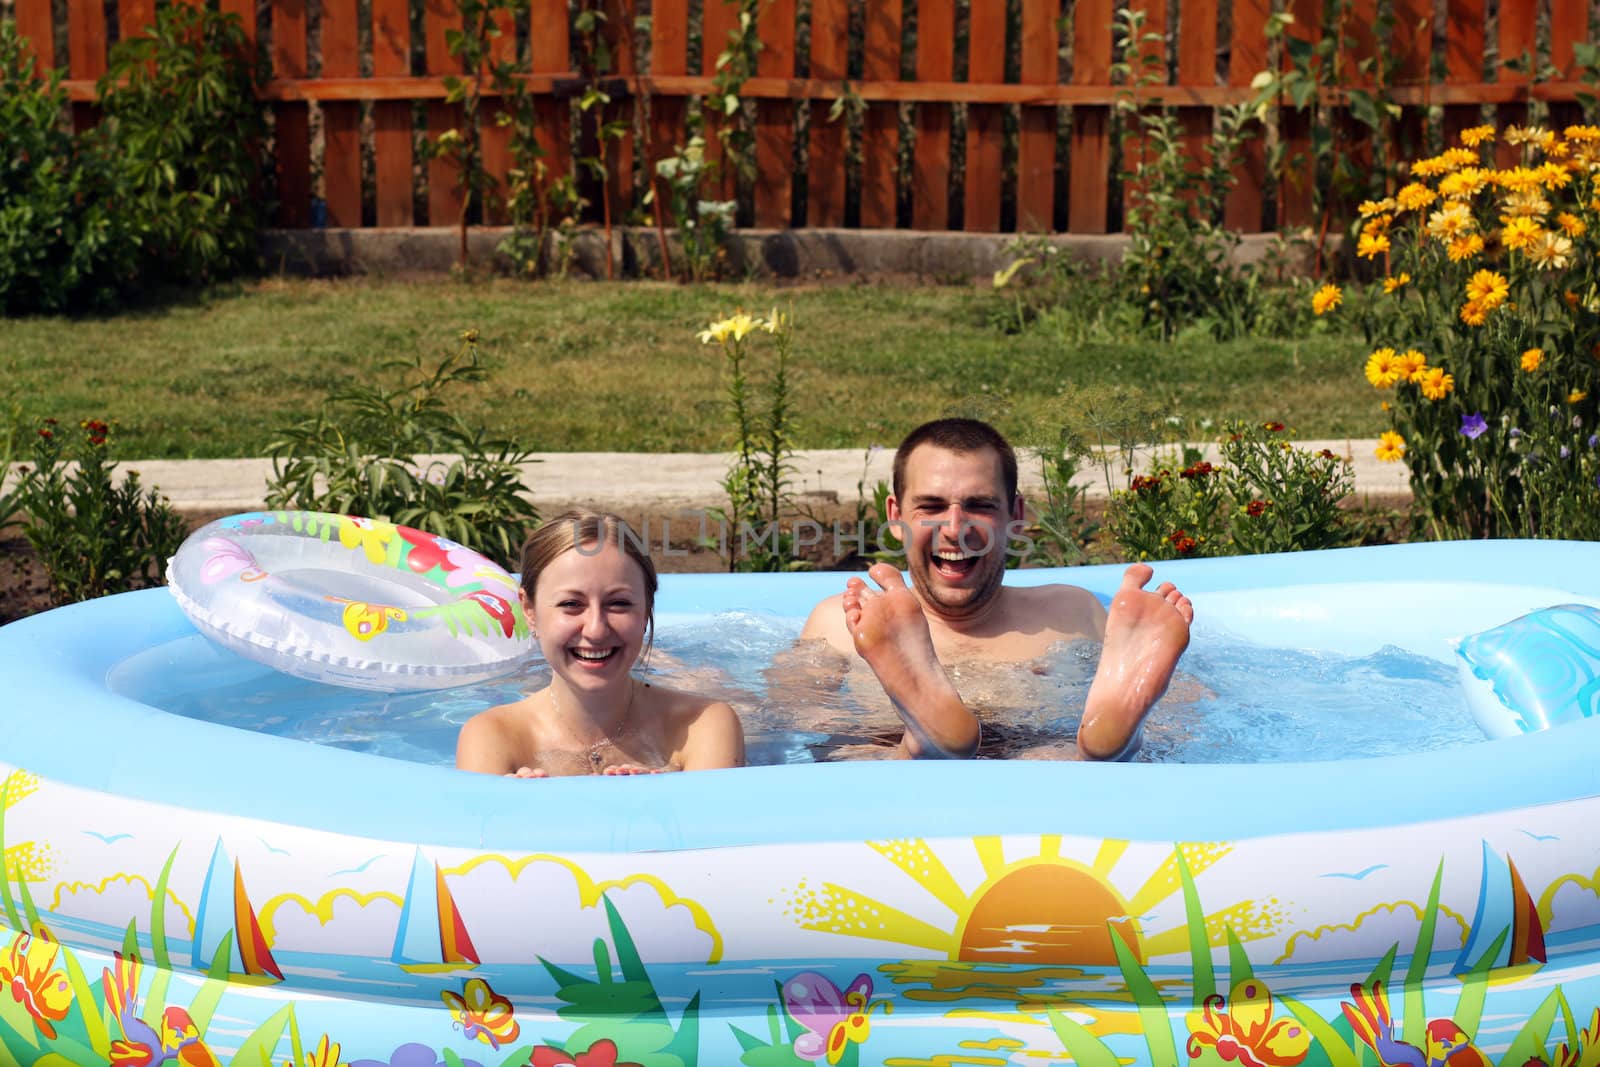 young pair bathes in inflatable pool